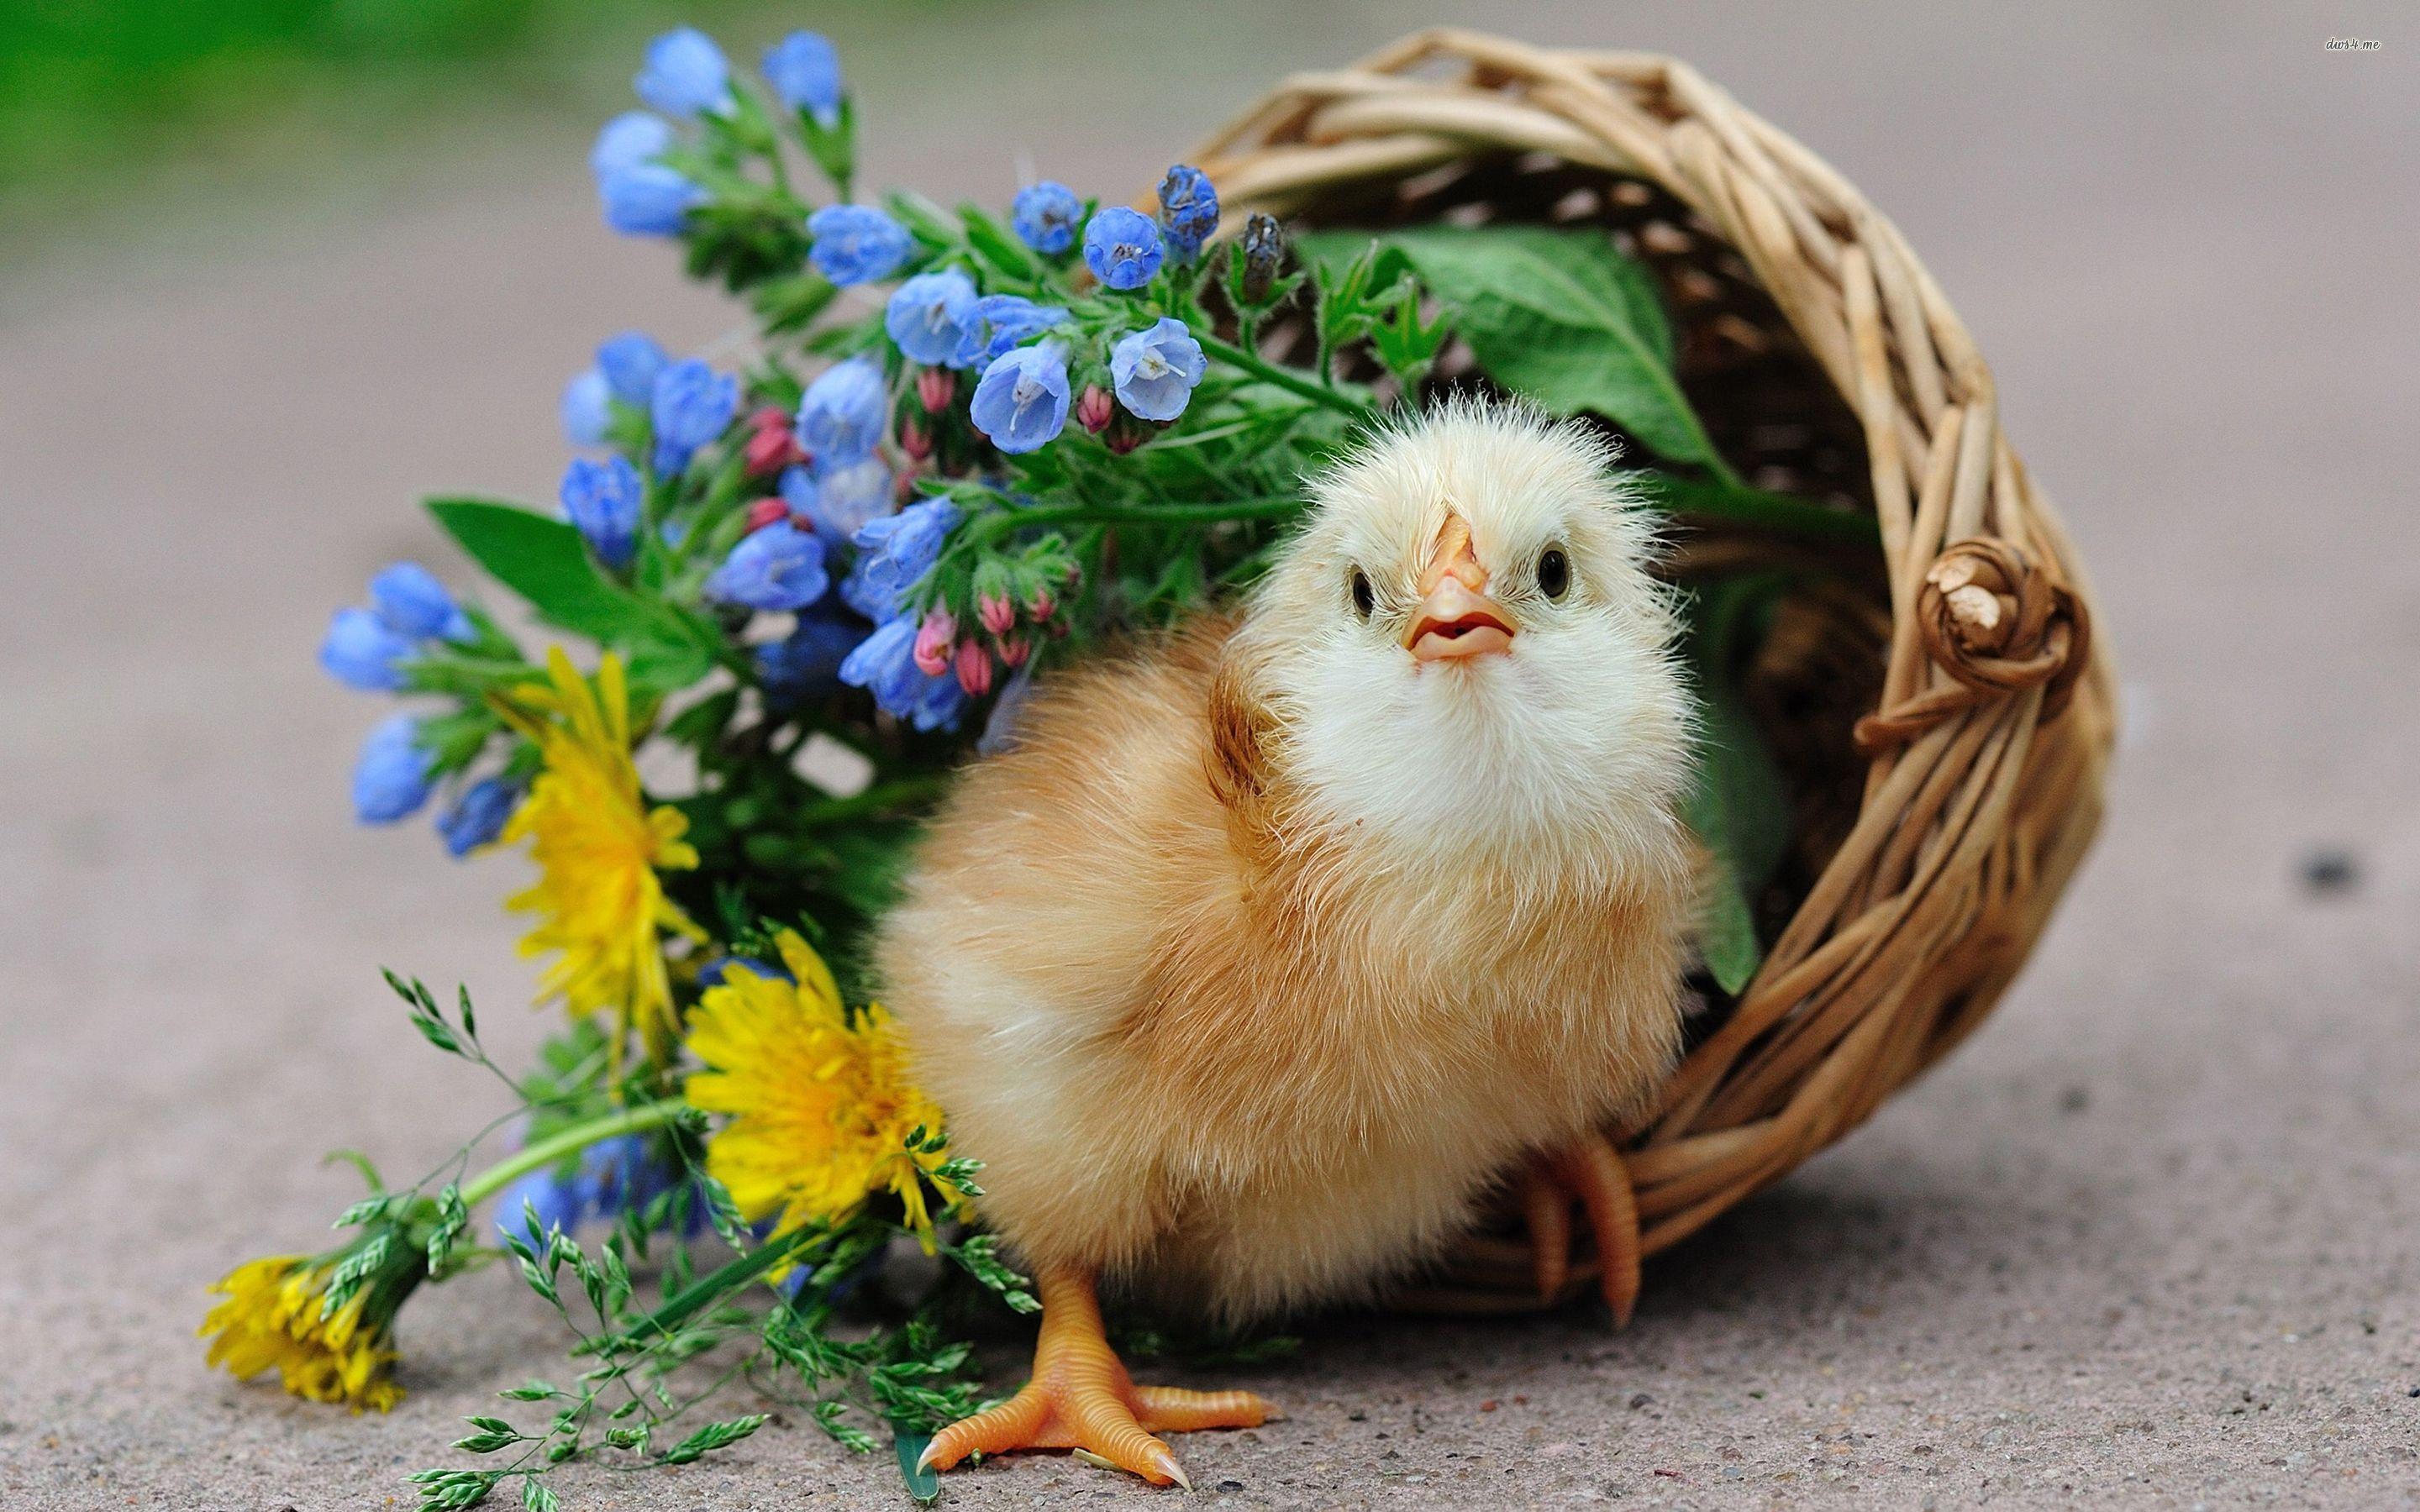 Chick in a floral basket wallpaper wallpaper